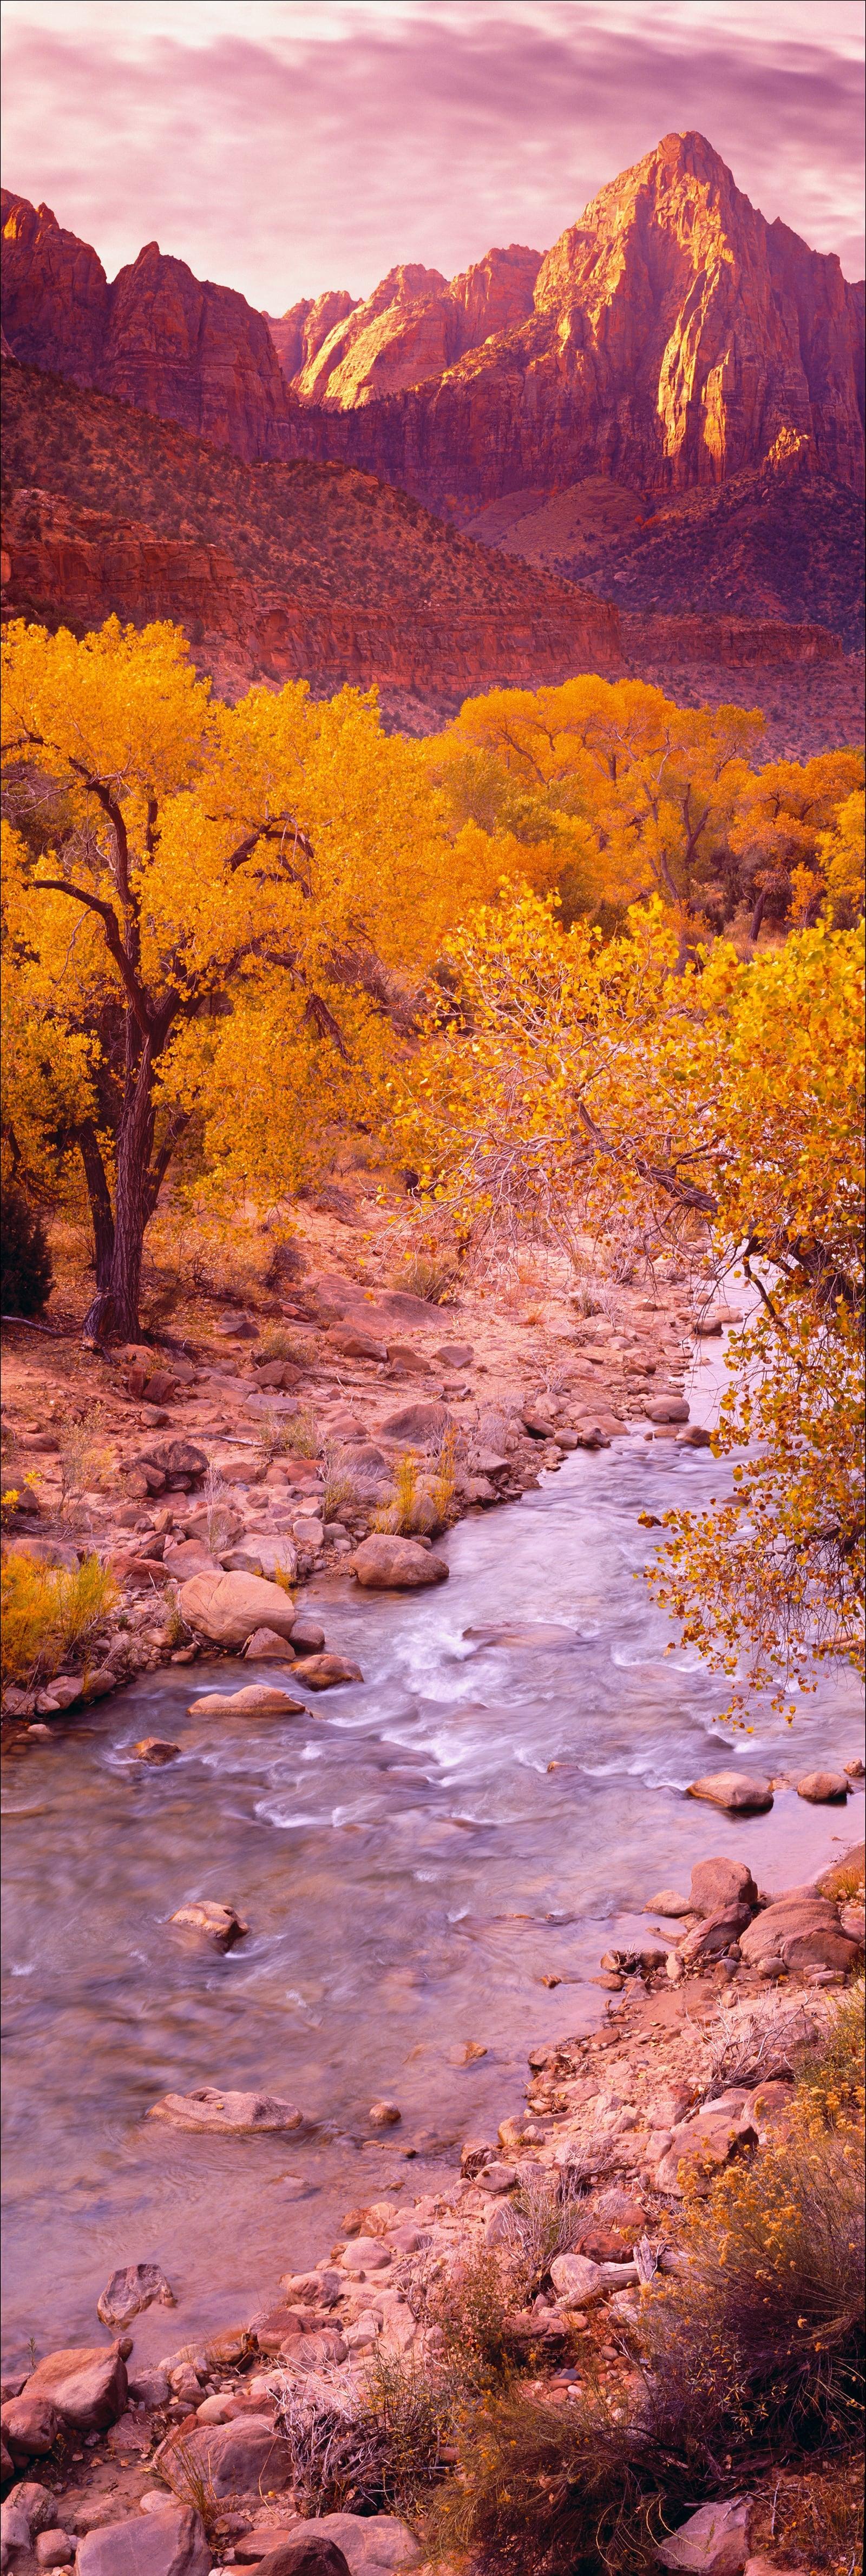 Virgin River running through tree filled rocky terrain with the mountains of Zion National Park Utah behind